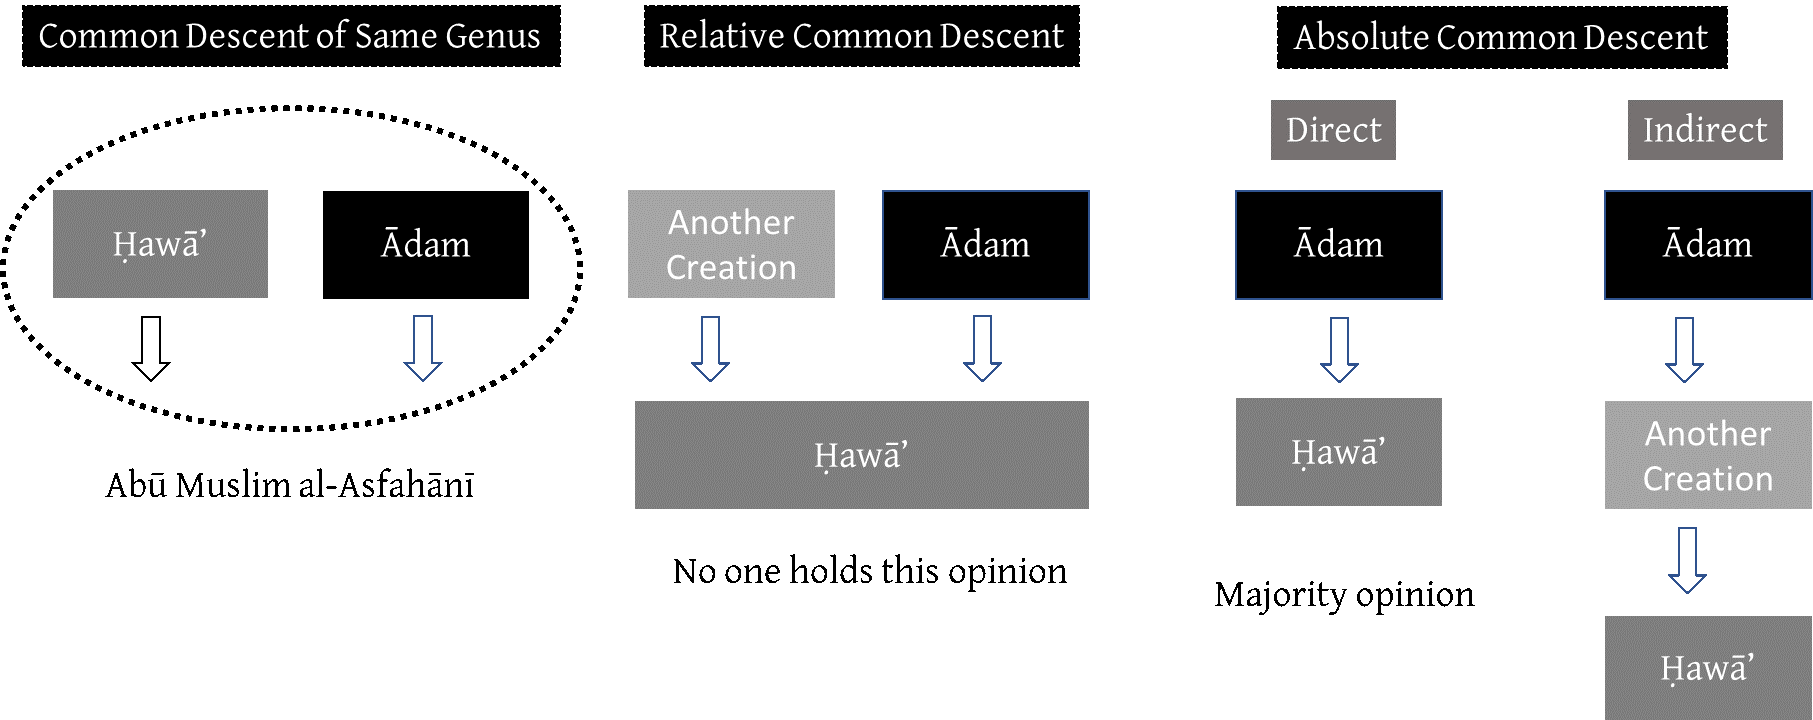 Types of Descent